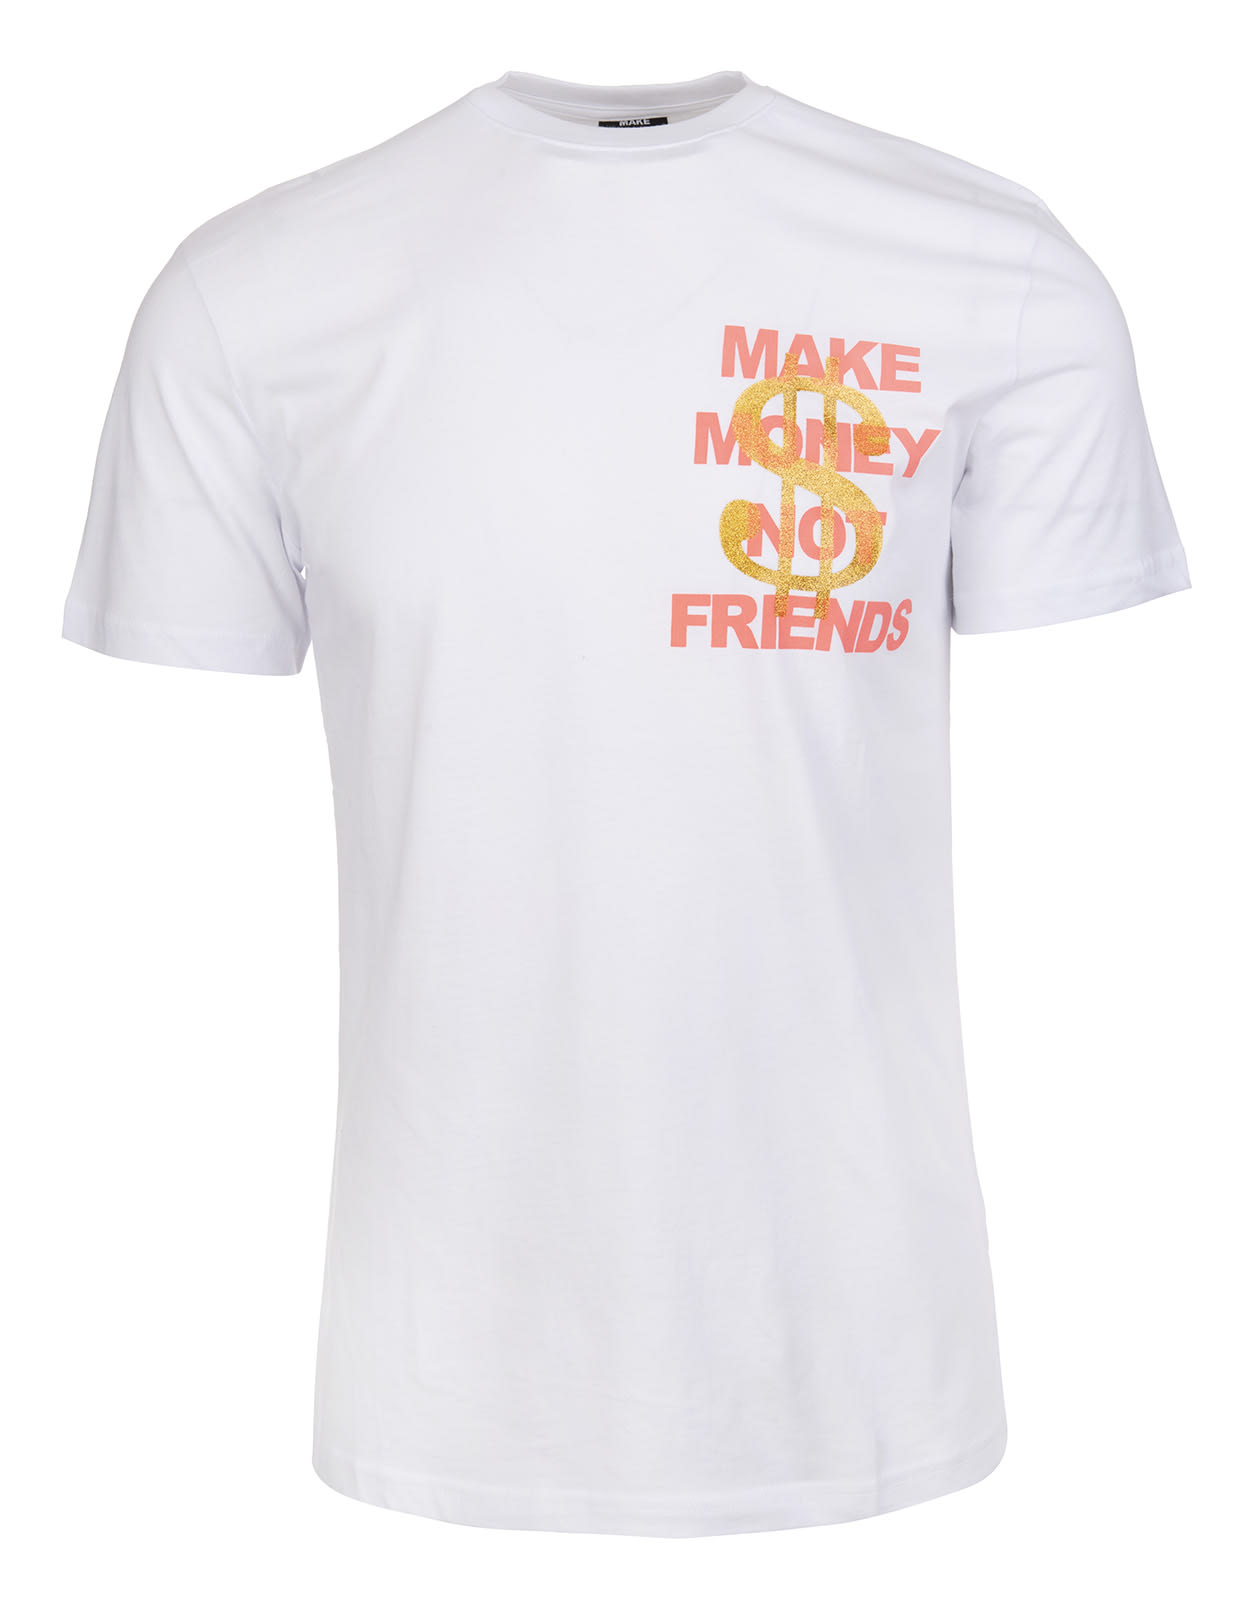 Make Money Not Friends White T-shirt With Coral Pink Logo And Golden Glitter Dollar